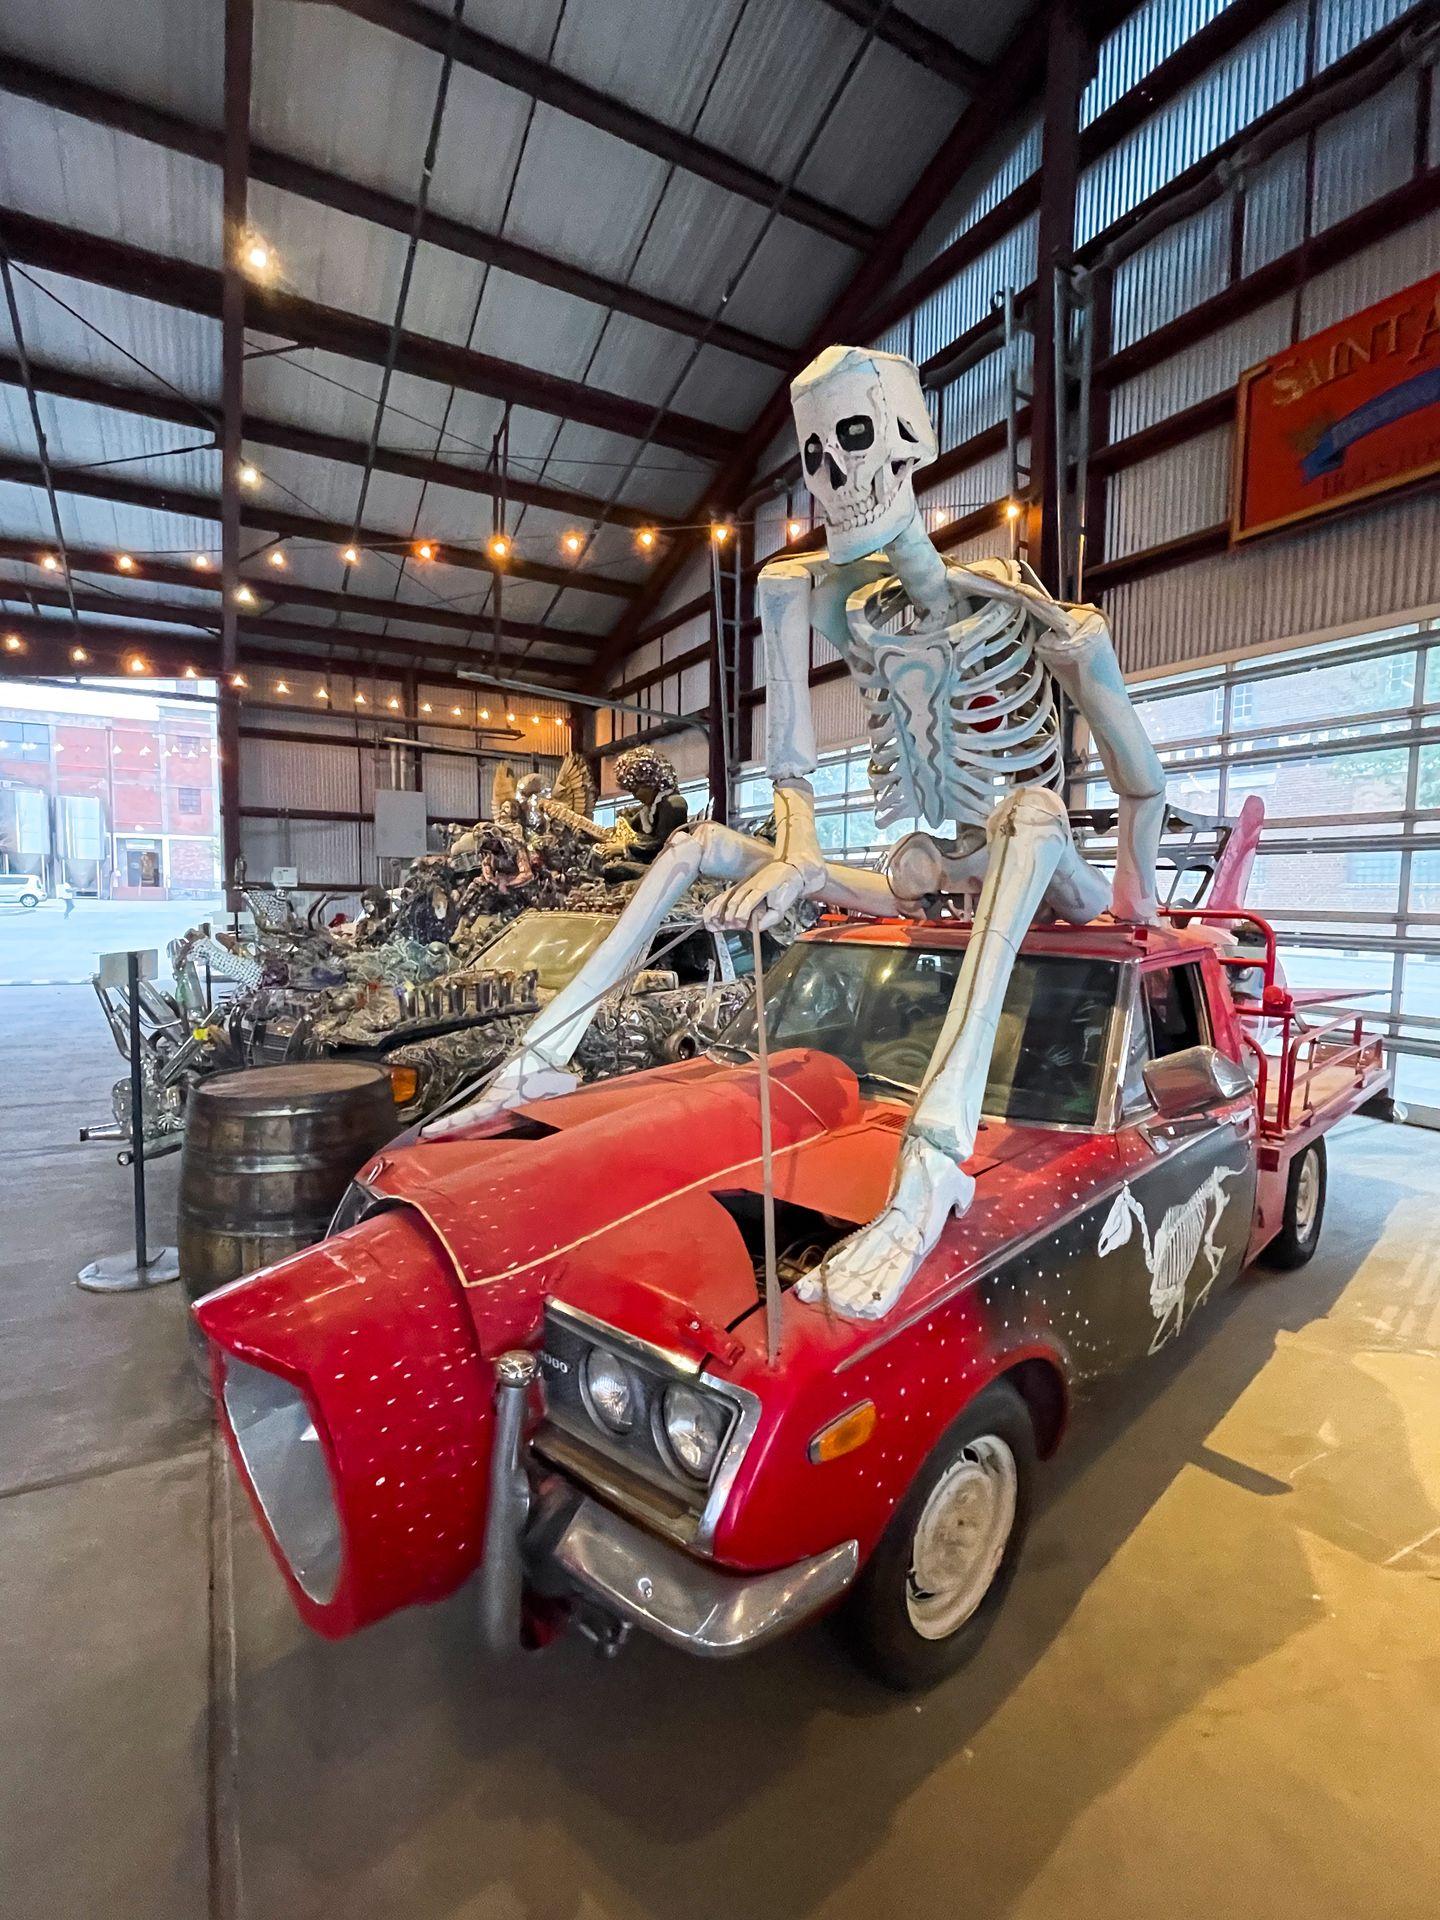 A giant skeleton on top of an Art Car at Saint Arnold Brewing Company